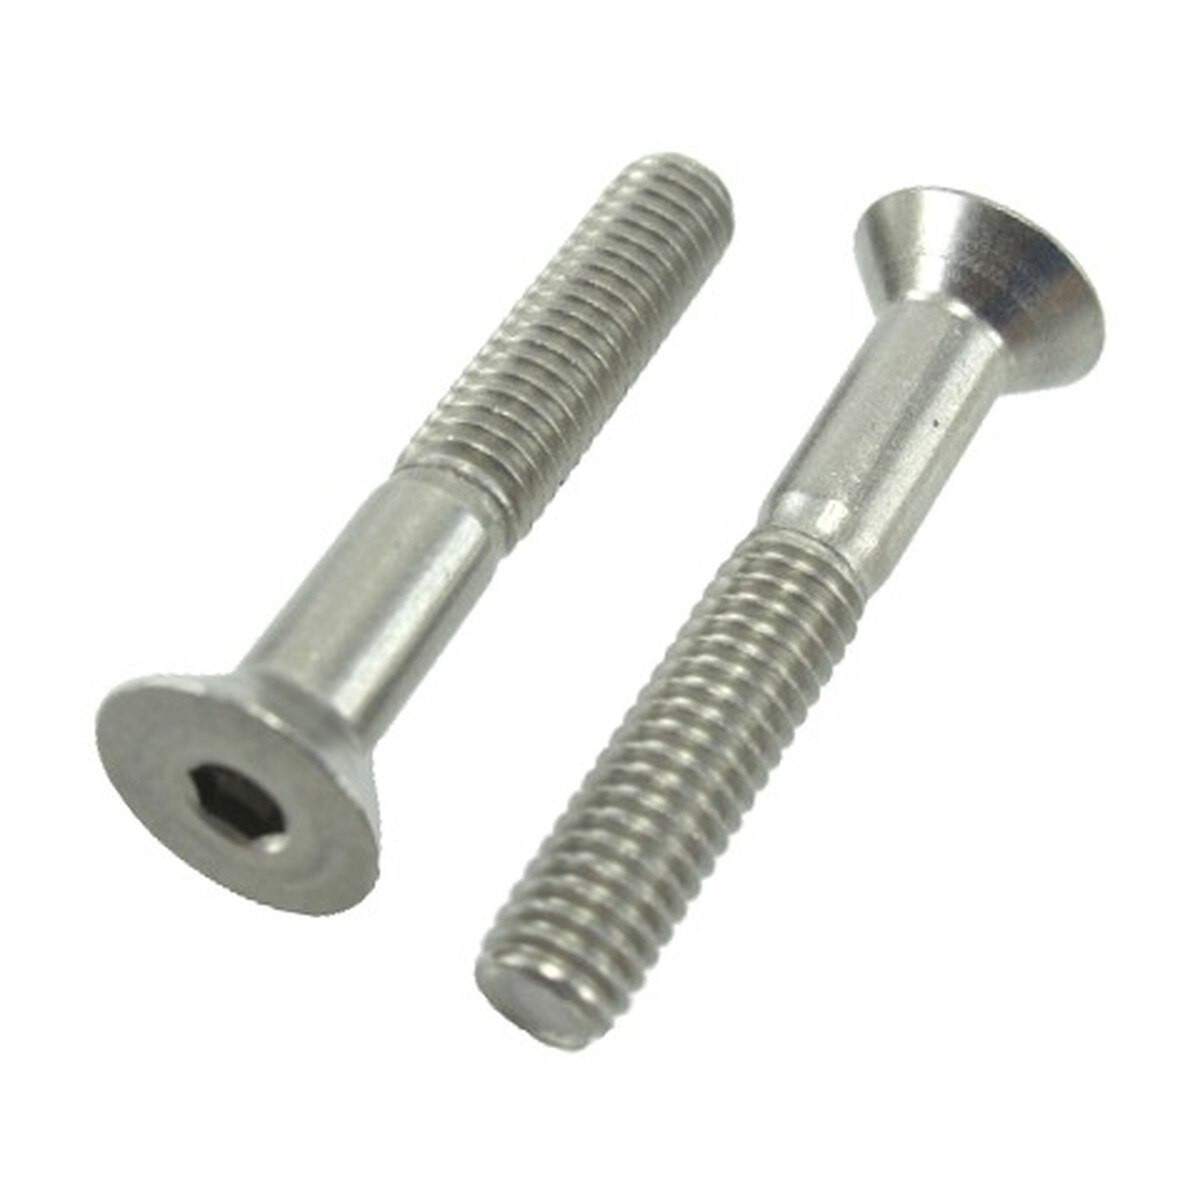 Qty Bolts 10 5/8-11 x 12" Stainless Steel Hex Head Cap Screws 